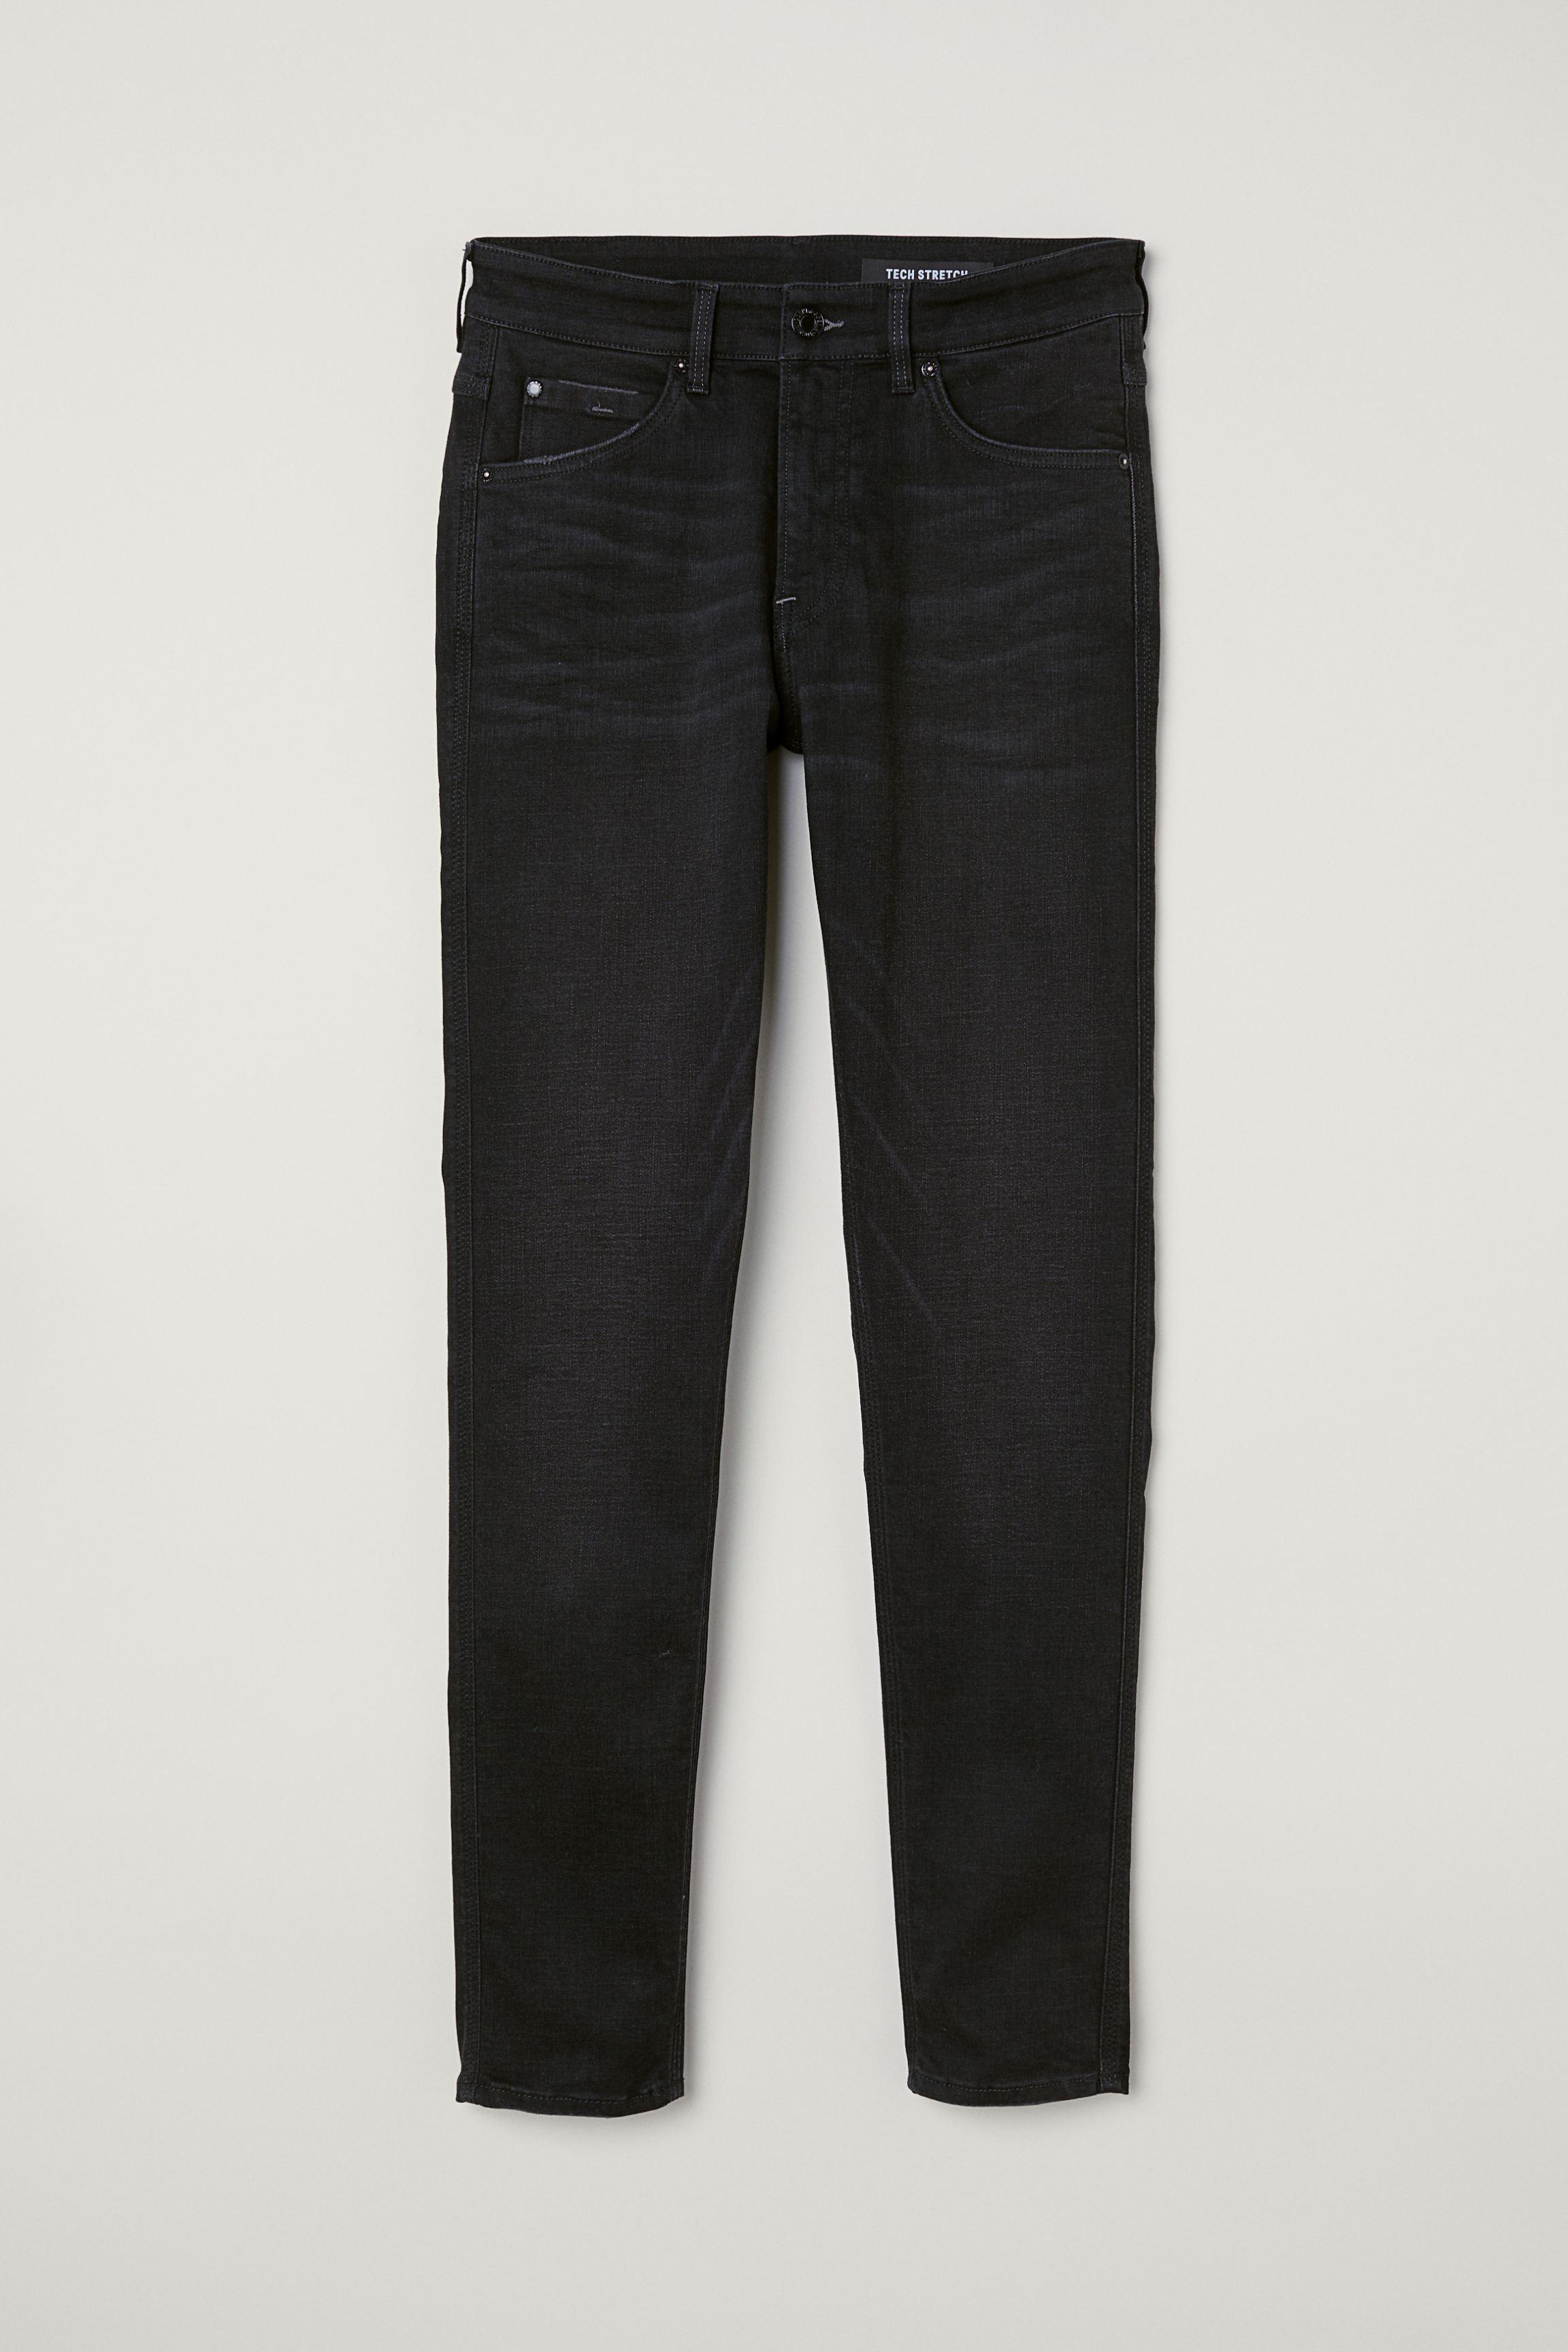 H&M Denim Tech Stretch Skinny Jeans in Black/Washed (Black) for - Lyst